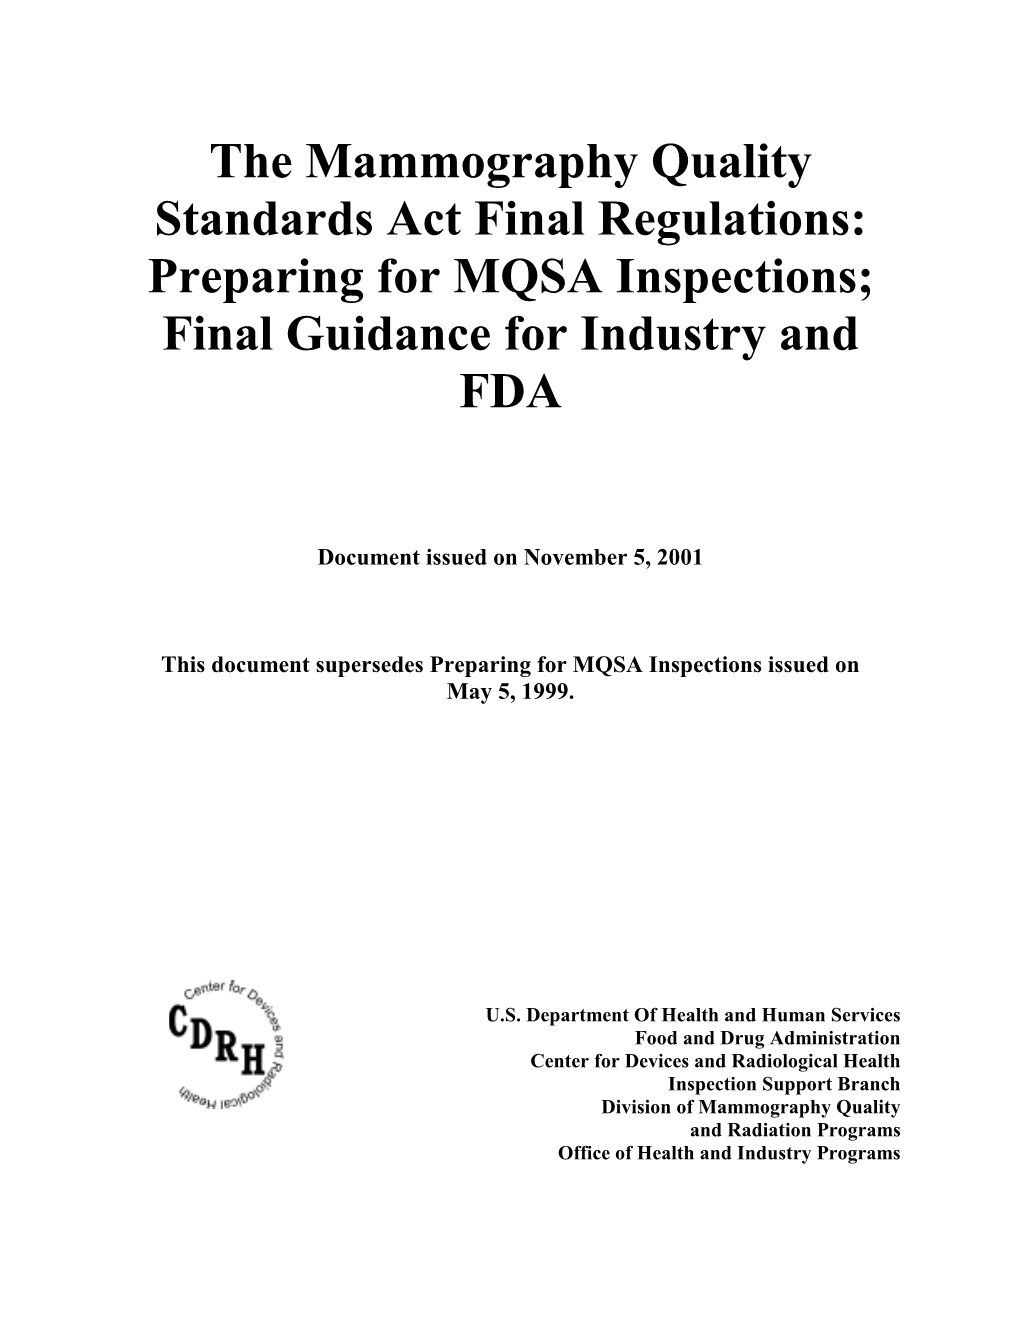 The Mammography Quality Standards Act Final Regulations: Preparing for MQSA Inspections; Final Guidance for Industry and FDA